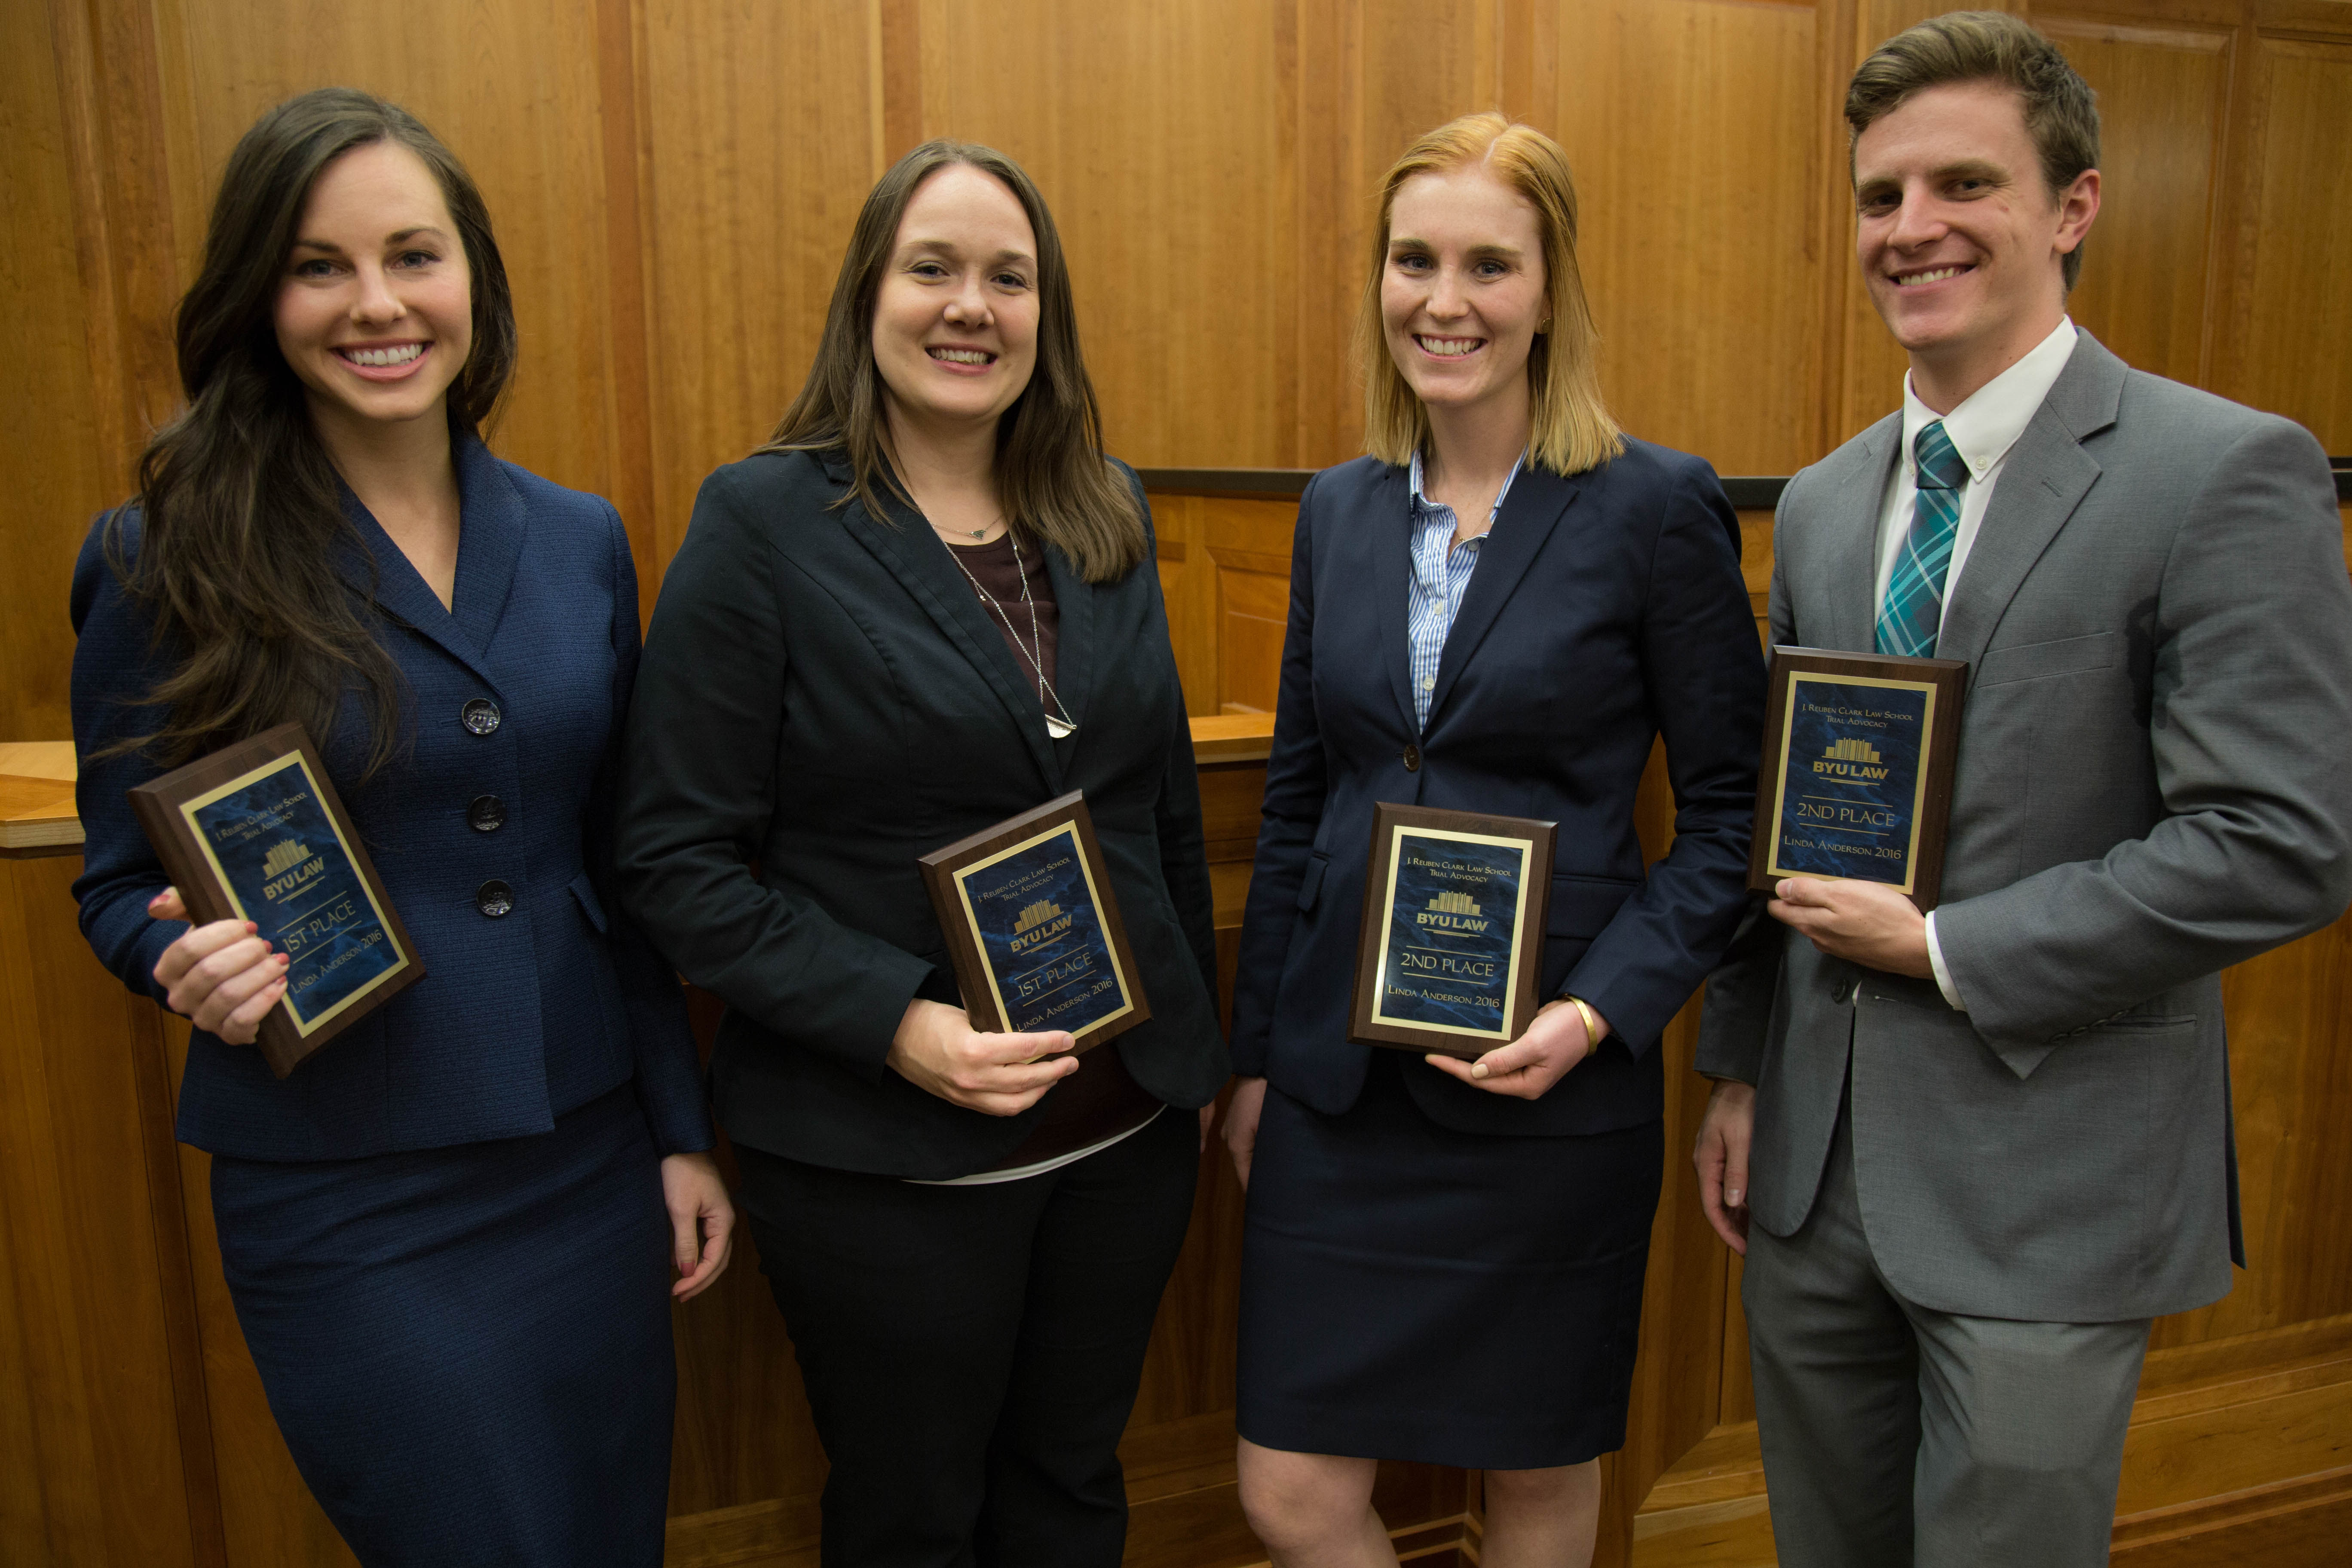 Krista-Lee Crook and Samantha Scott hold their first place plaques. They stand next to their competition, Bronwen Evans and Mike Snell. (BYU Law School) 